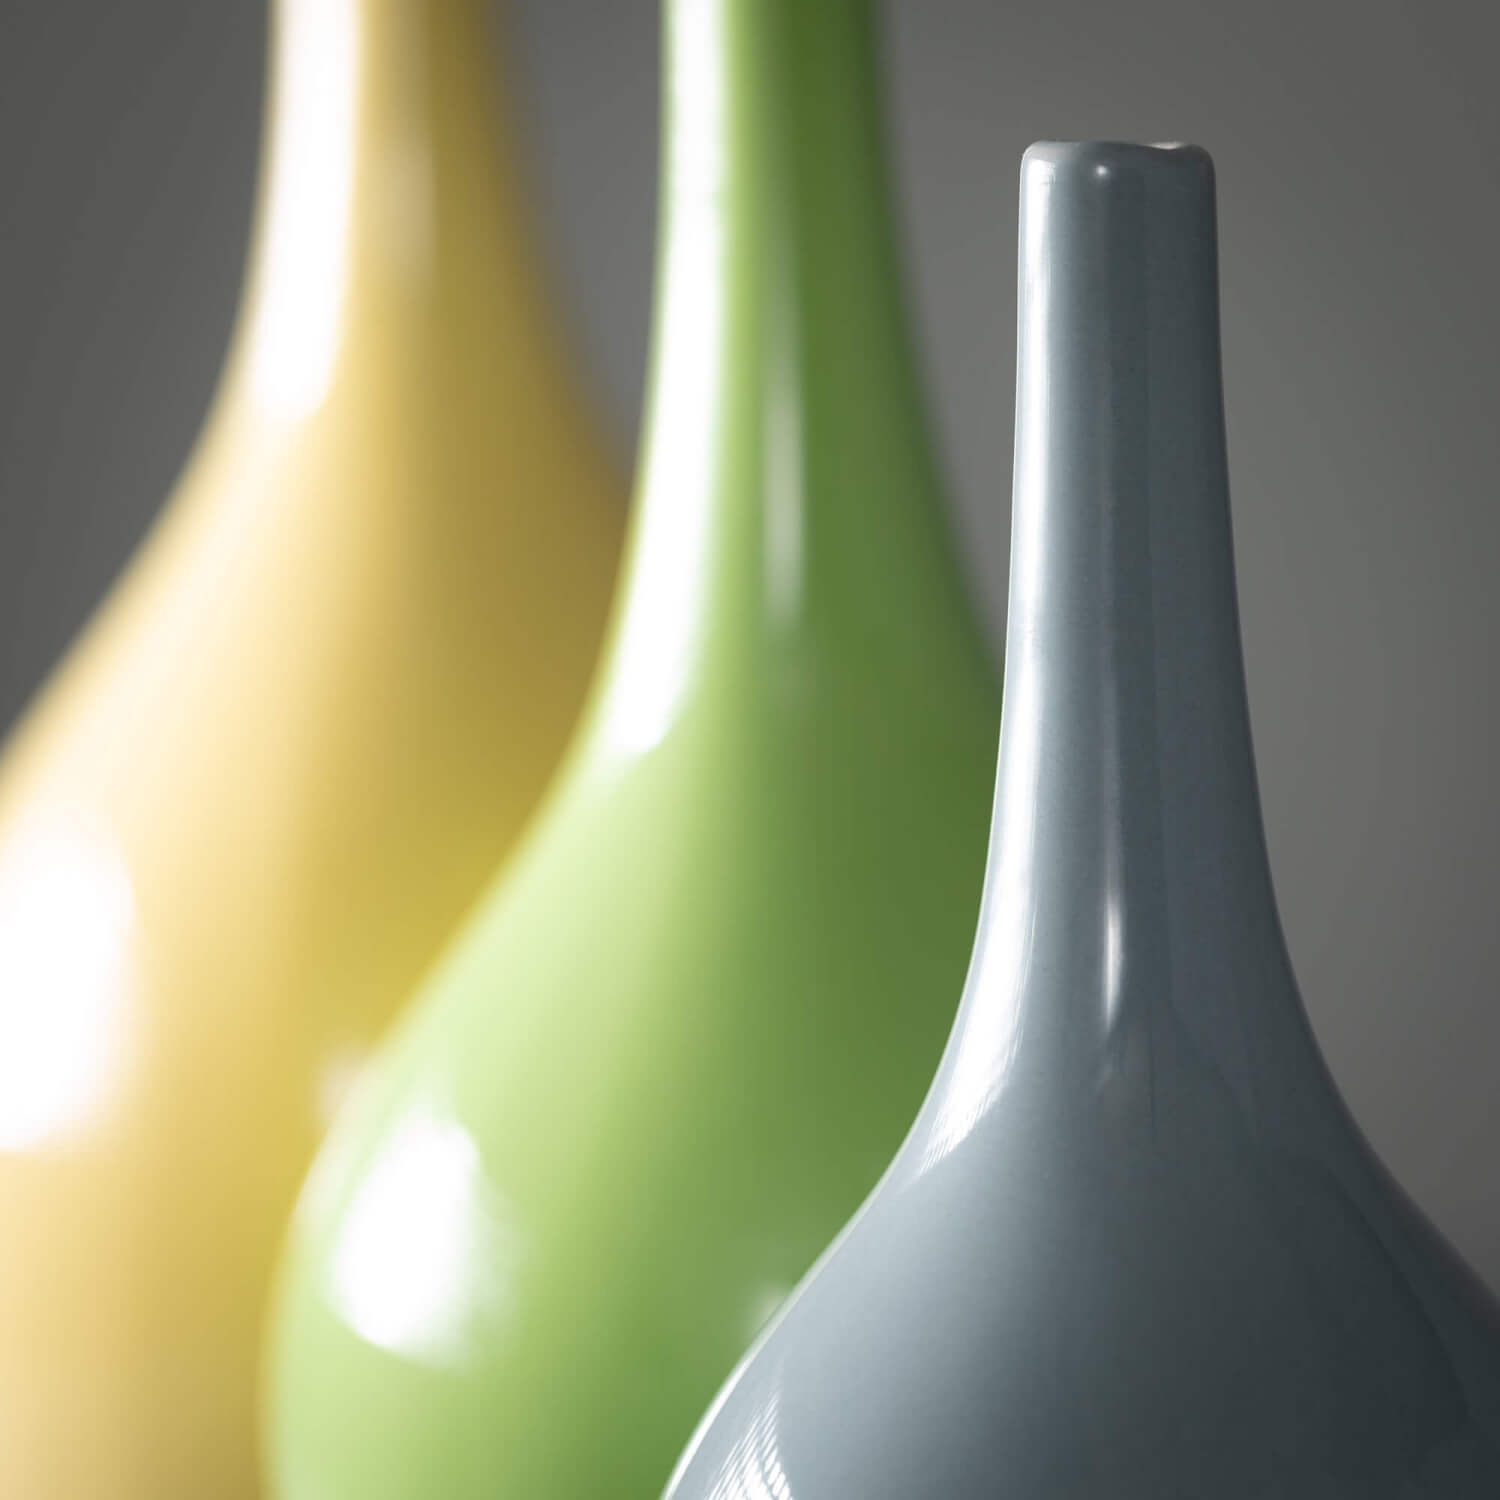 close up view of the necks of all three bright glossy vases